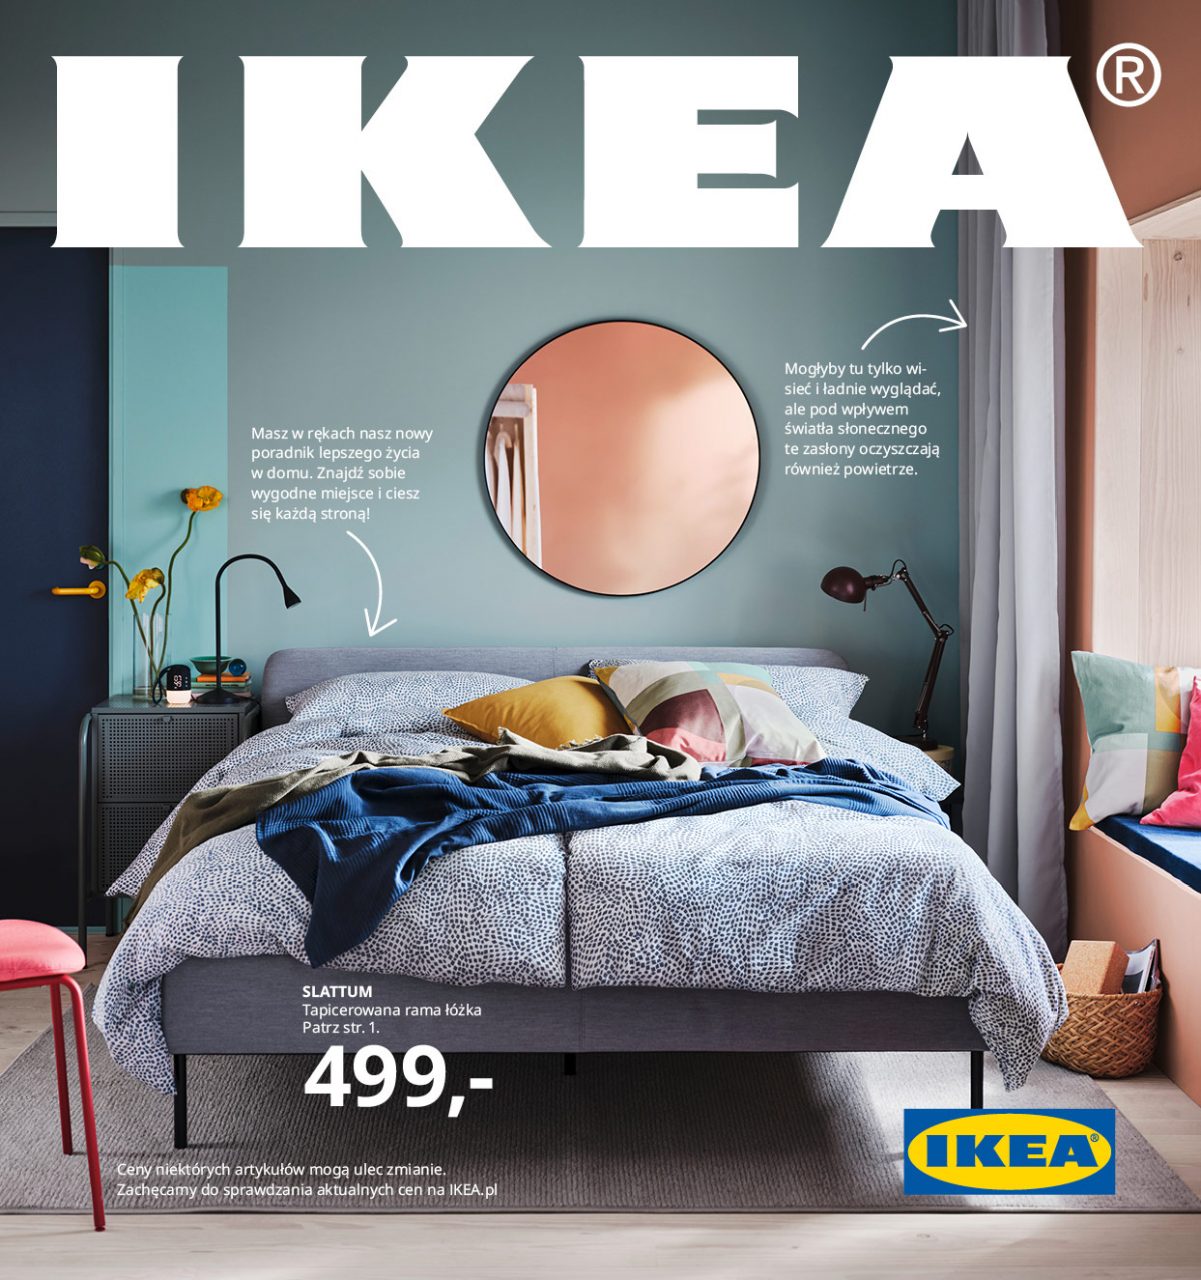 The new 2021 IKEA US catalog is now available online - IKEA